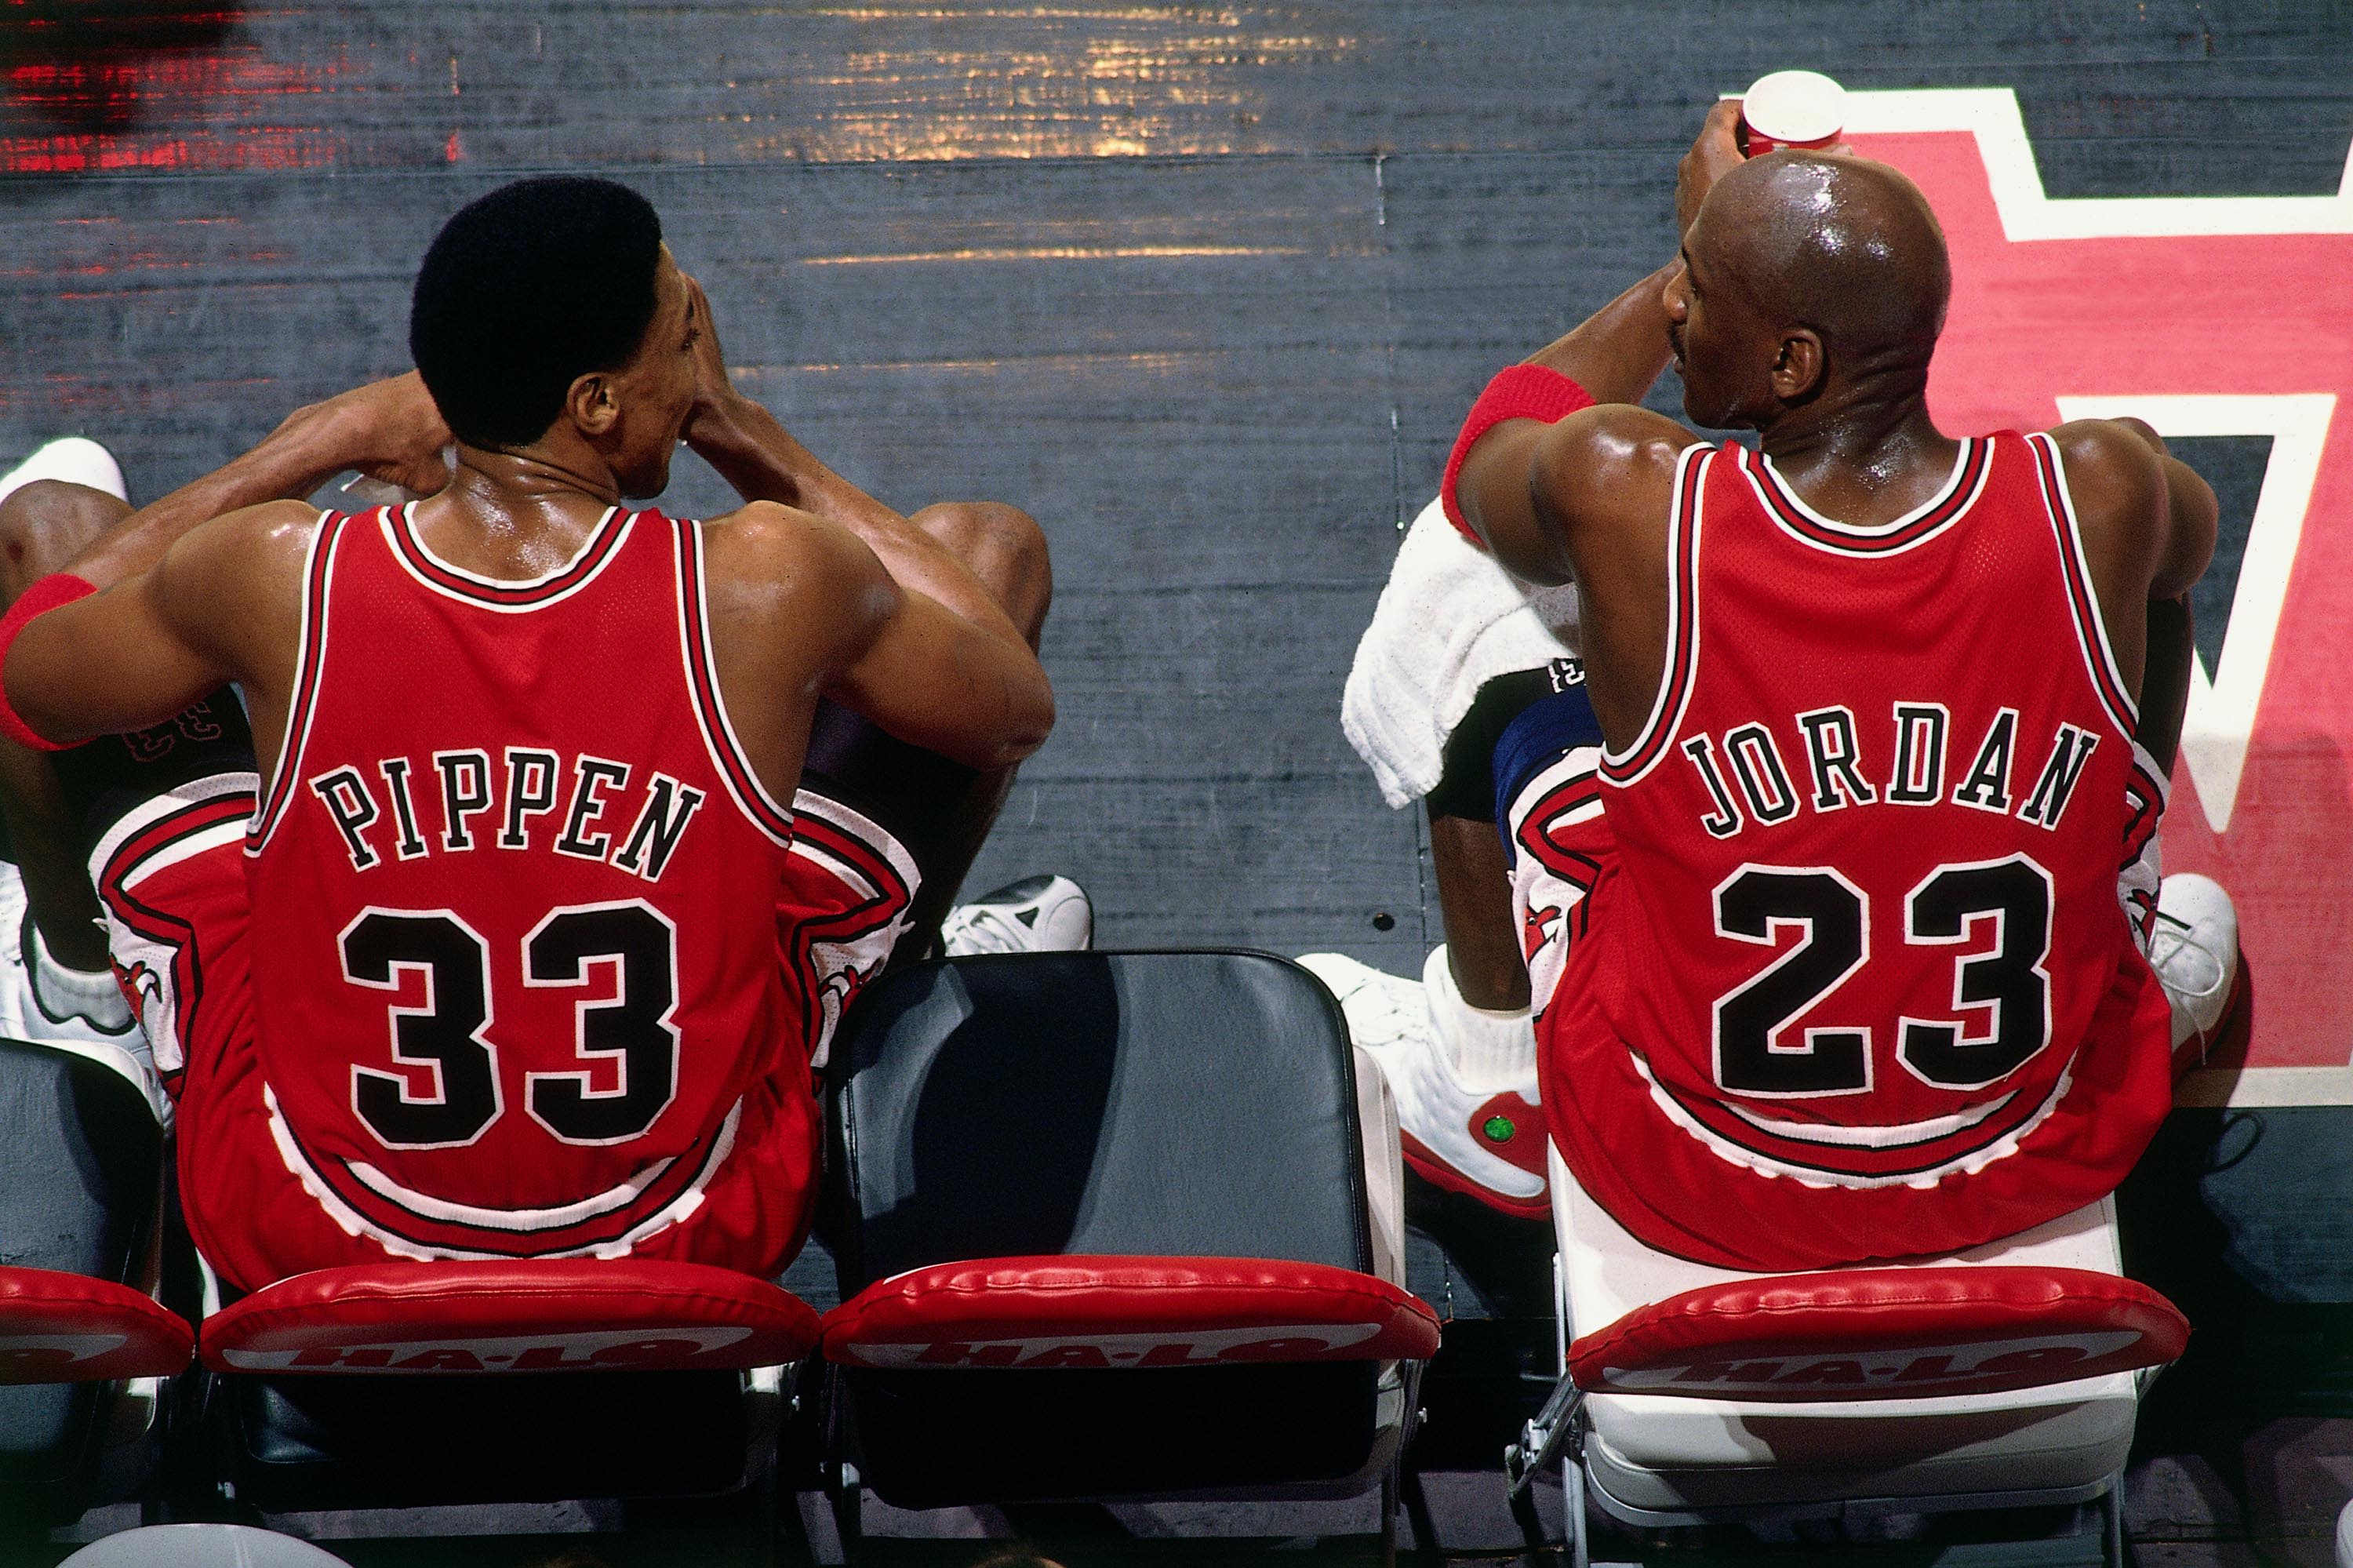 Scottie Pippen was the 2nd-best player of the '90s 